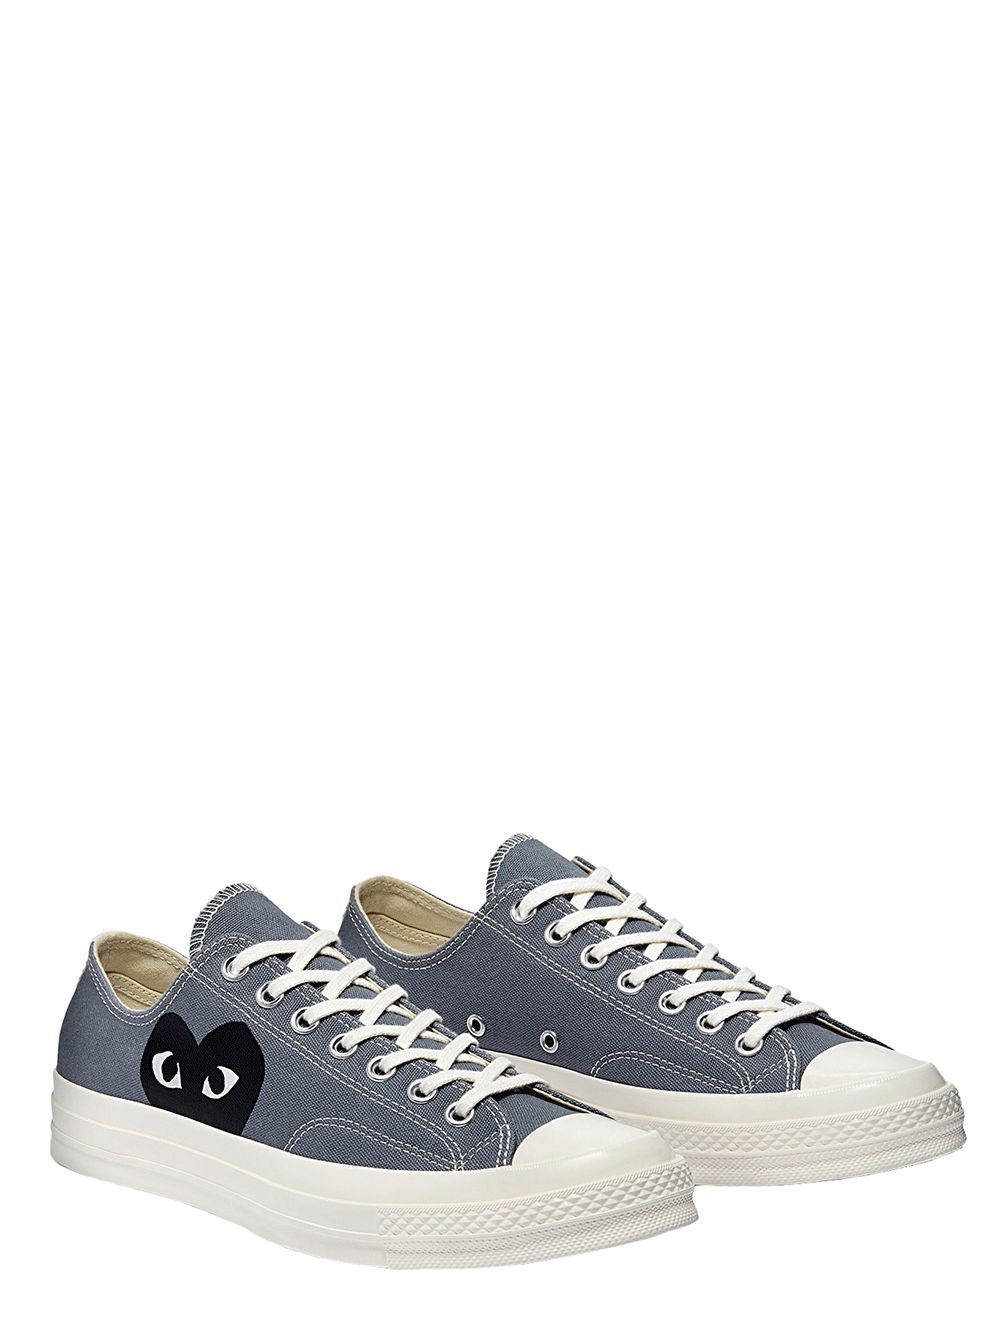 COMME-des-GARCONS-PLAY-CONVERSE-PLAY-Converse-Chuck-70-Peek-A-Boo-Heart-Low-Cut-Sneakers-Grey-2